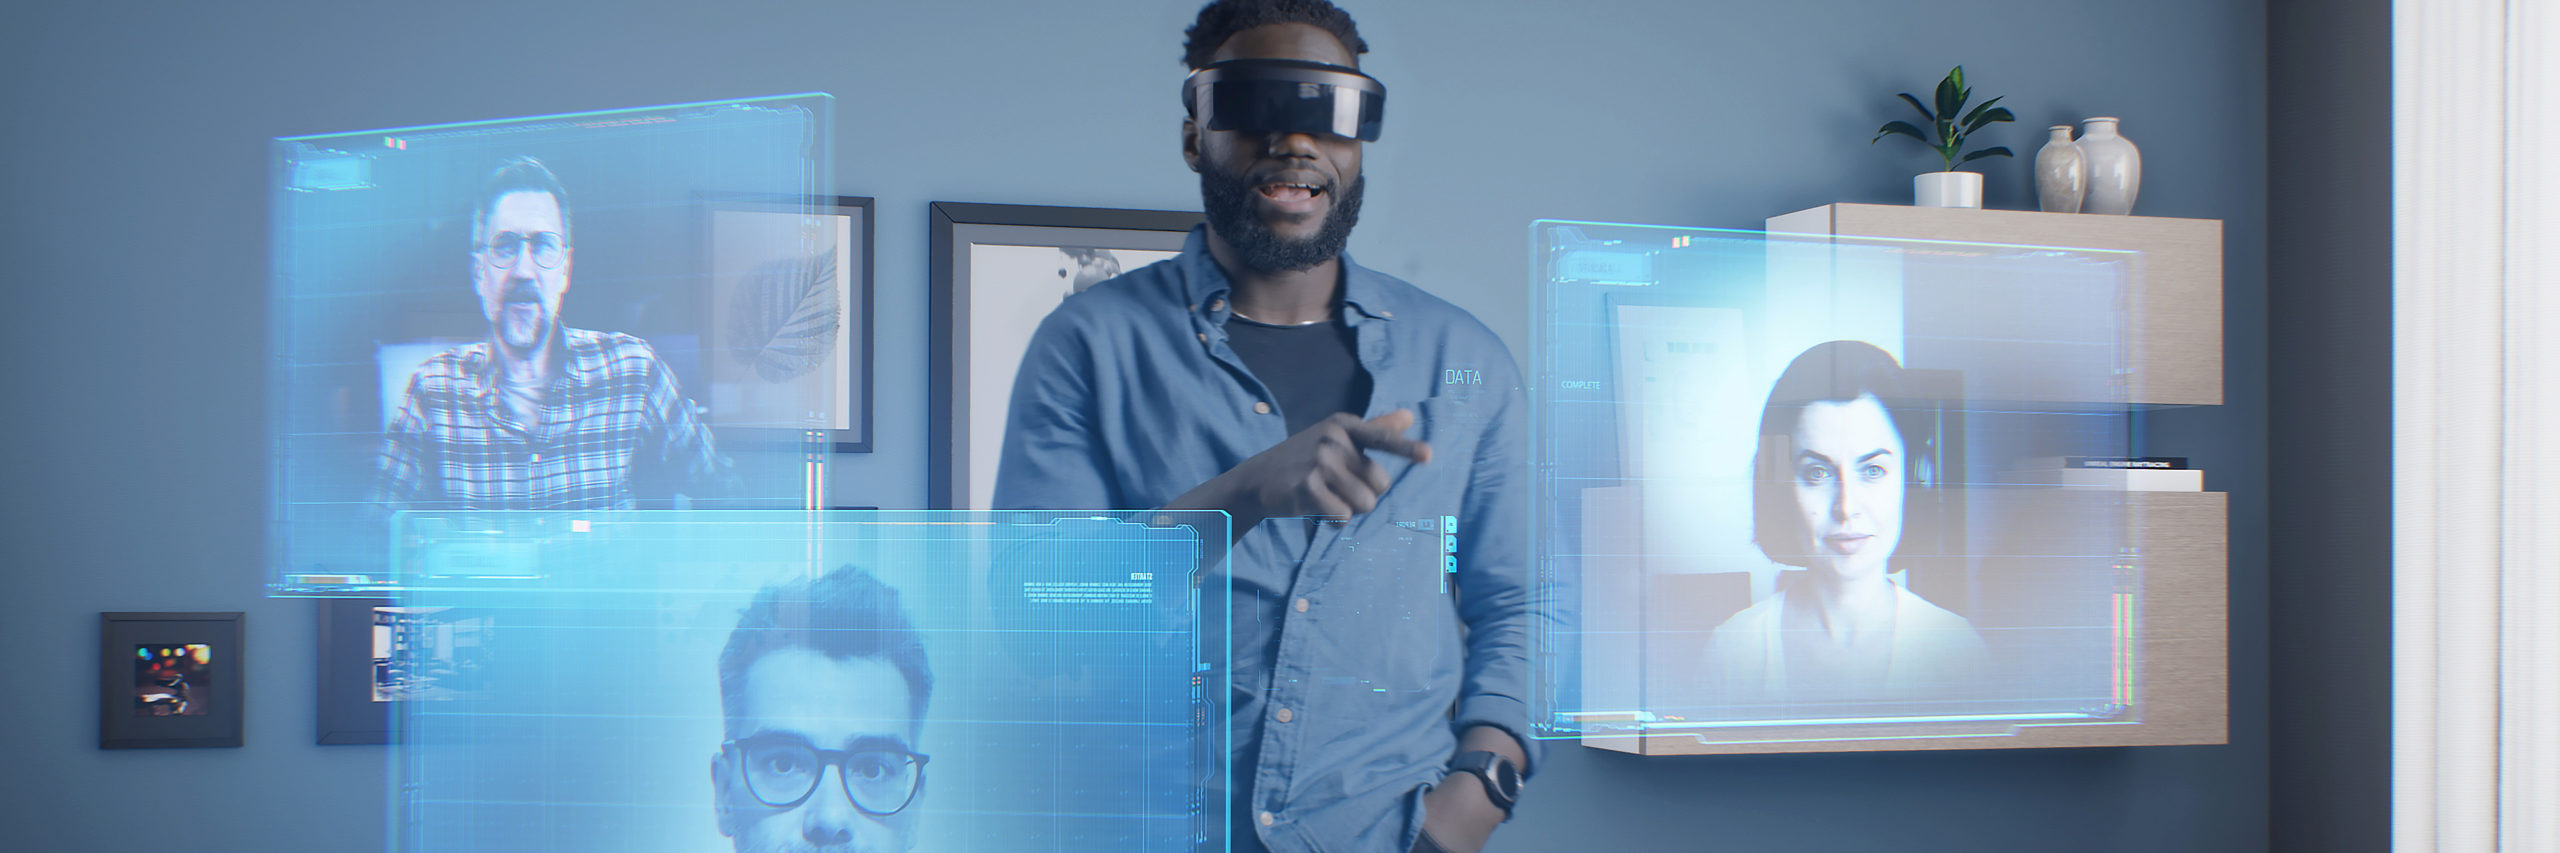 A person wearing an AR headset with digital screens in front of them.